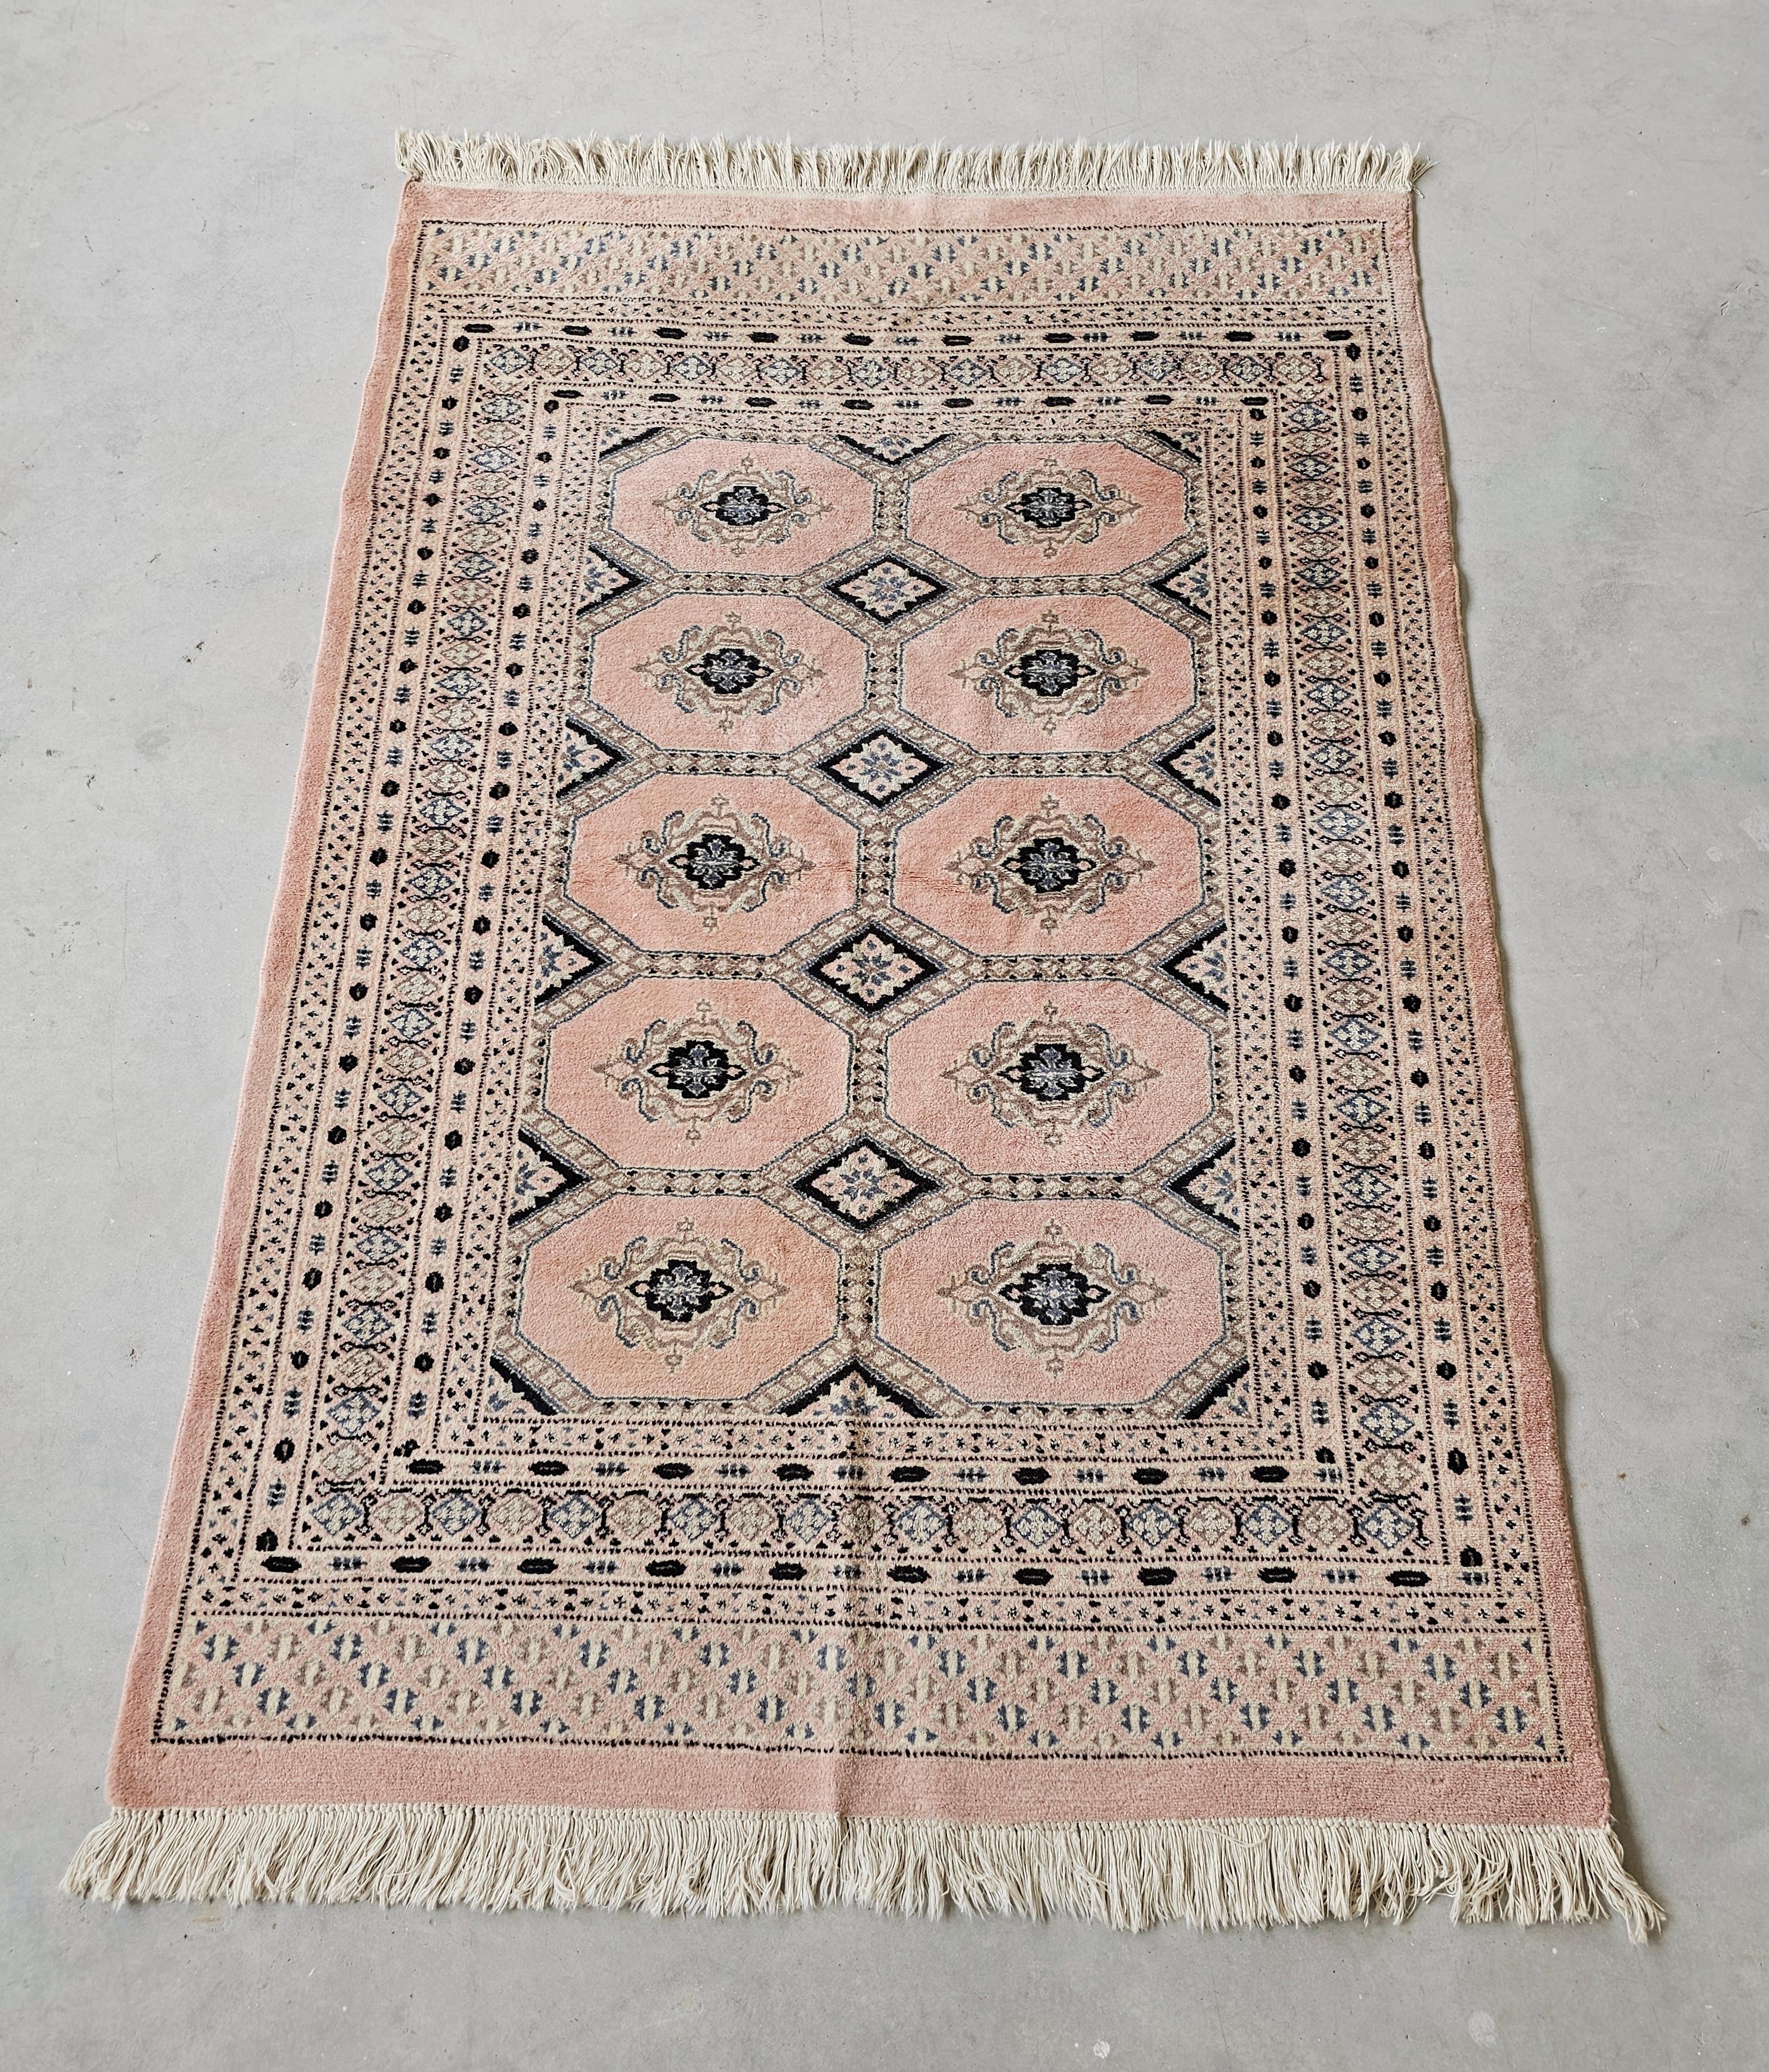 In this listing you will find a vintage Bokhara rug in very rare powder pink tone. It is a hand-knotted, 100% wool rug with high density knots. Made in Pakistan cca. 1950s.

Very good vintage condition with very few signs of time and use.

When